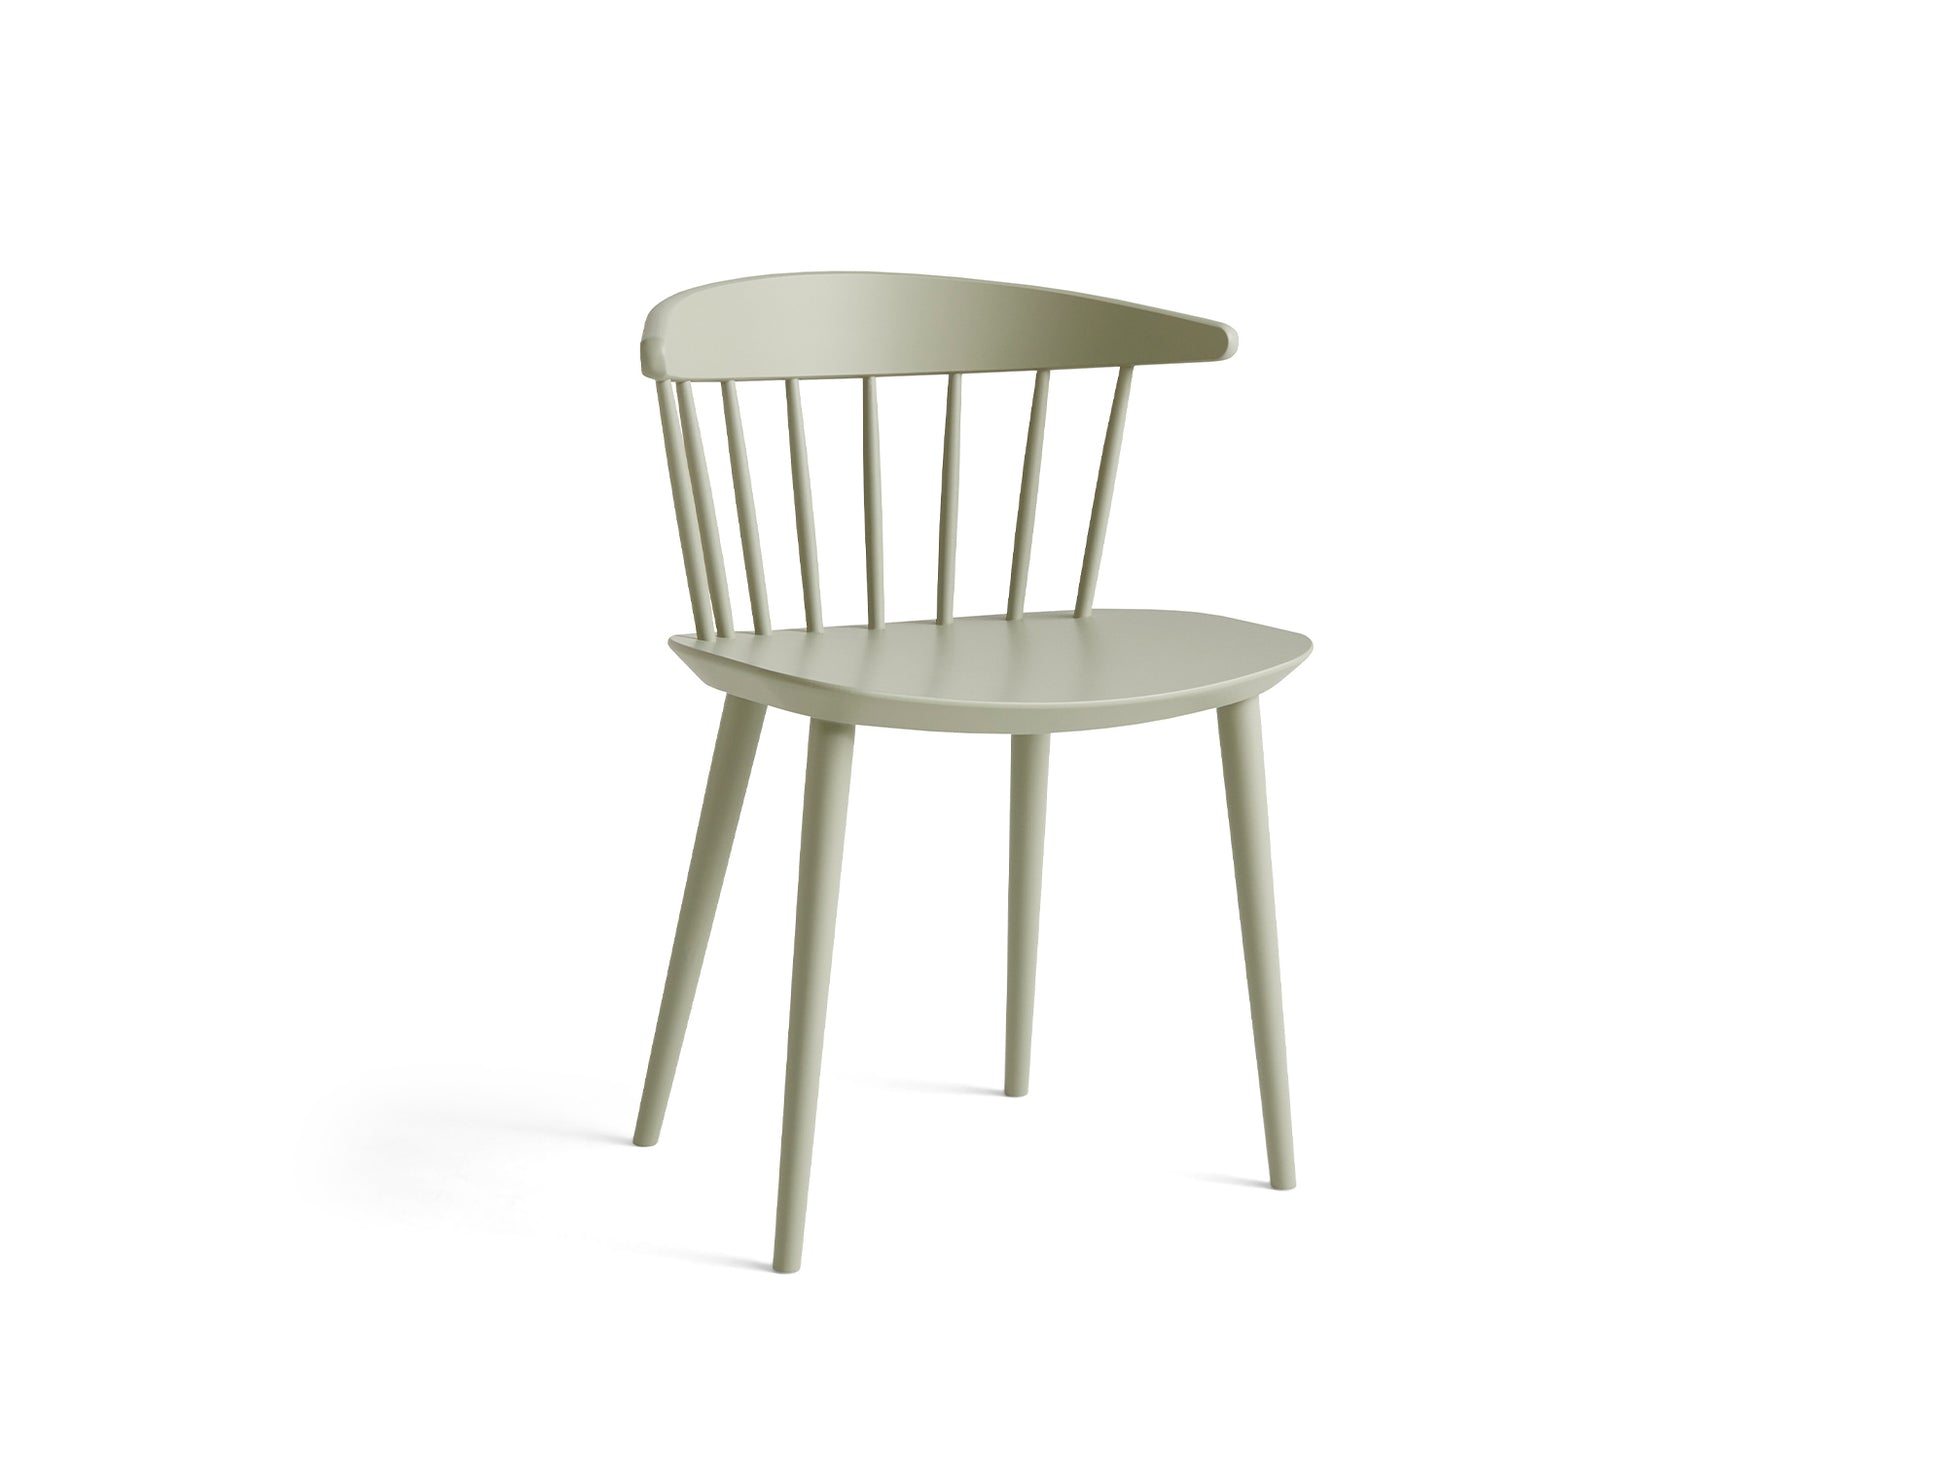 J104 Chair by HAY - Sage Beech